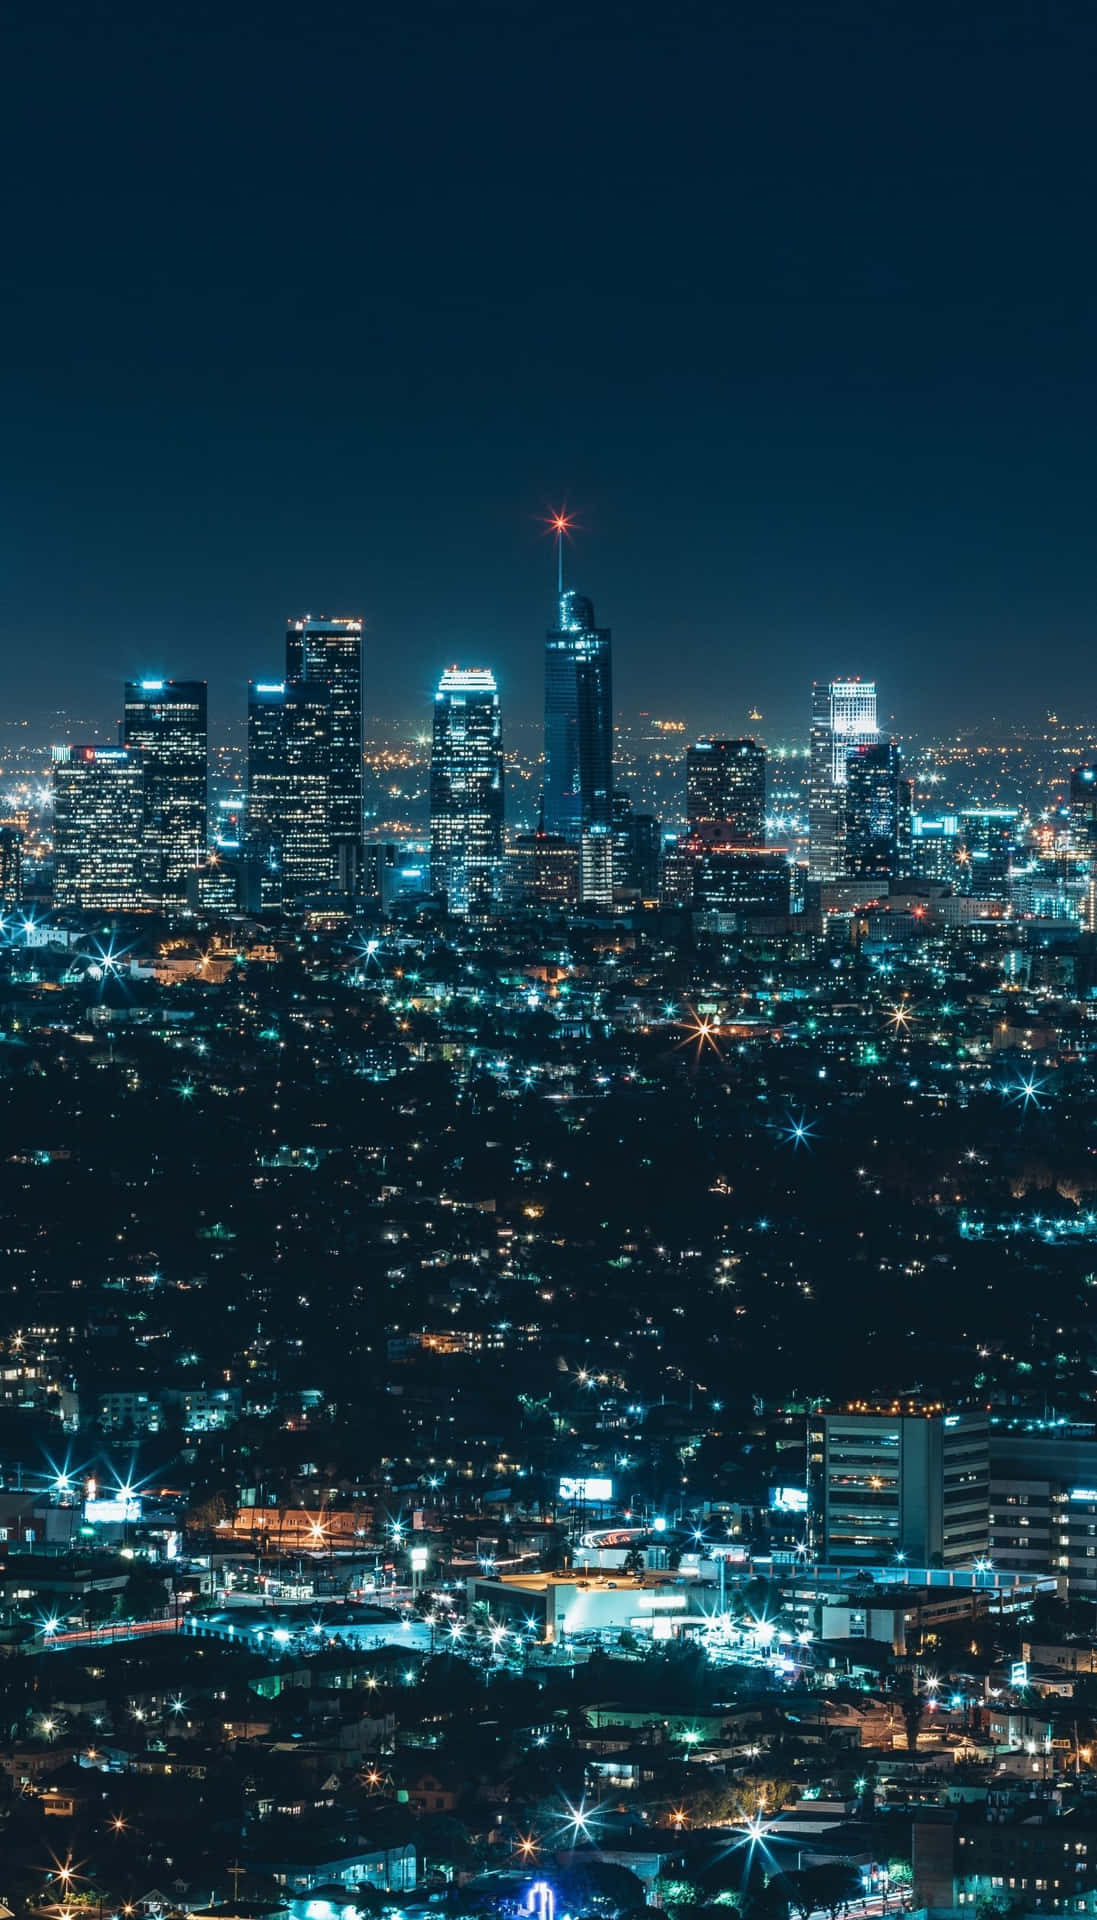 A View Of The City Of Los Angeles At Night